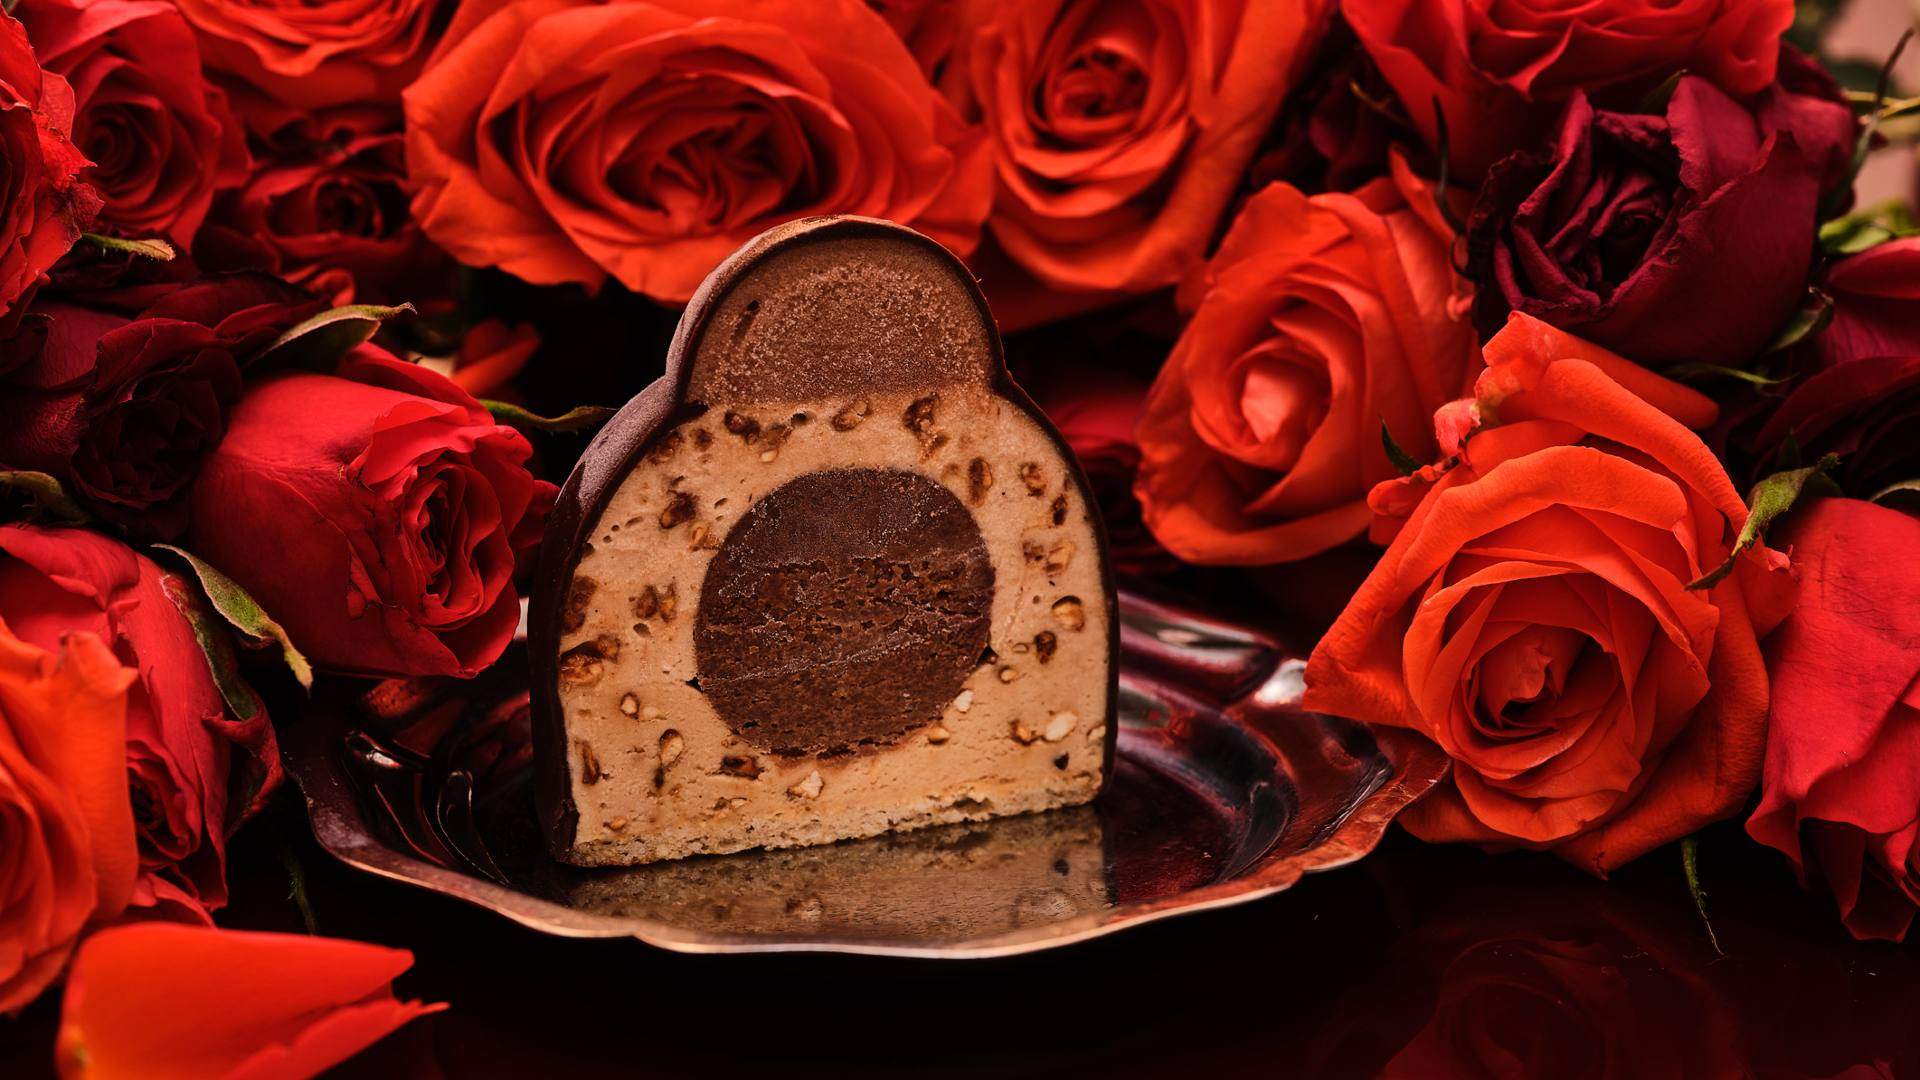 Piccolina's Latest Limited-Edition Baci Gelato Cake Will Help You Win Hearts This Valentine's Day